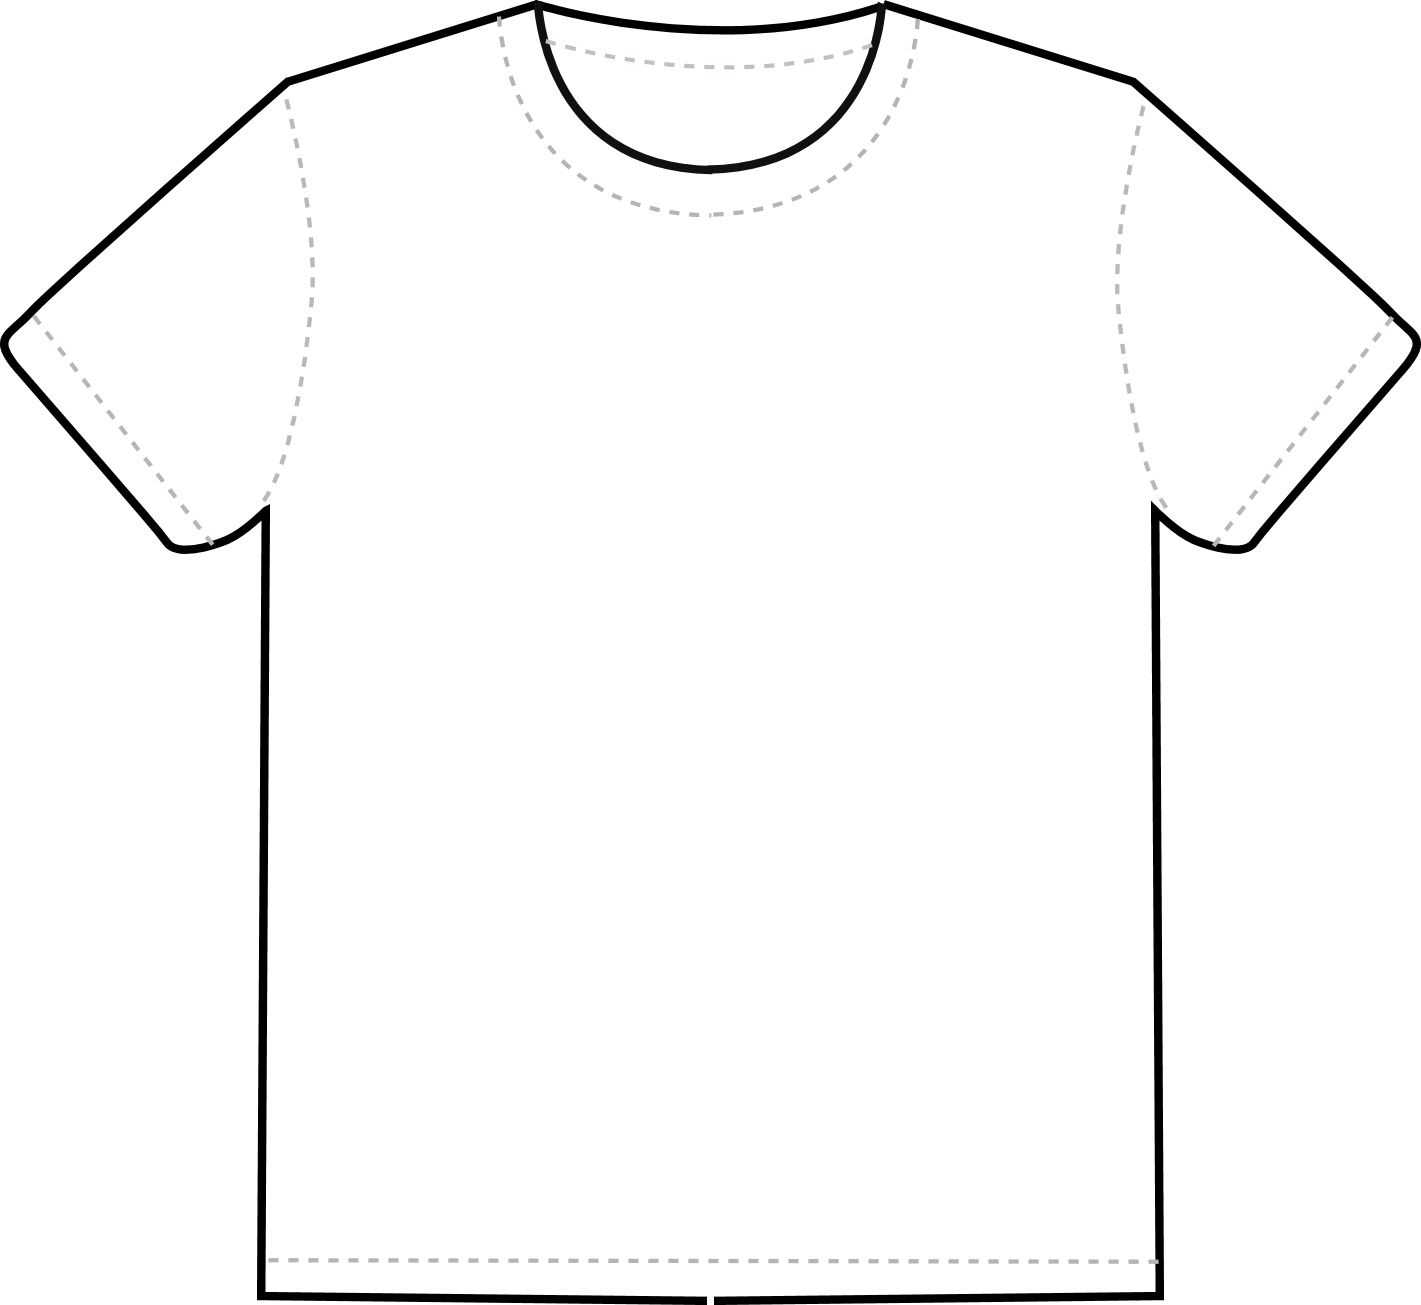 Blank T Shirt Outline Template - CUMED.ORG